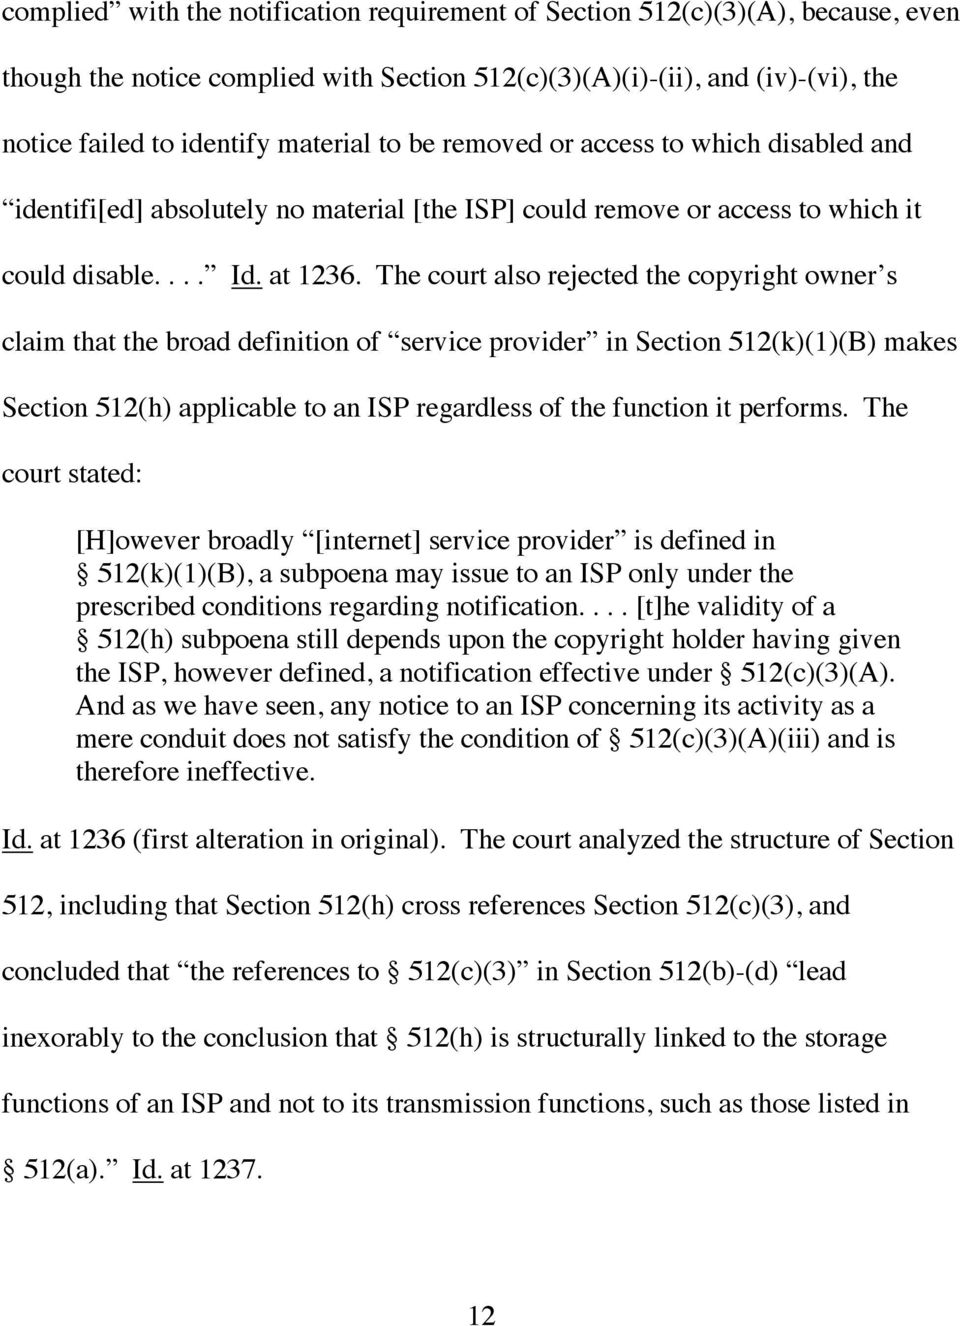 The court also rejected the copyright owner s claim that the broad definition of service provider in Section 512(k)(1)(B) makes Section 512(h) applicable to an ISP regardless of the function it